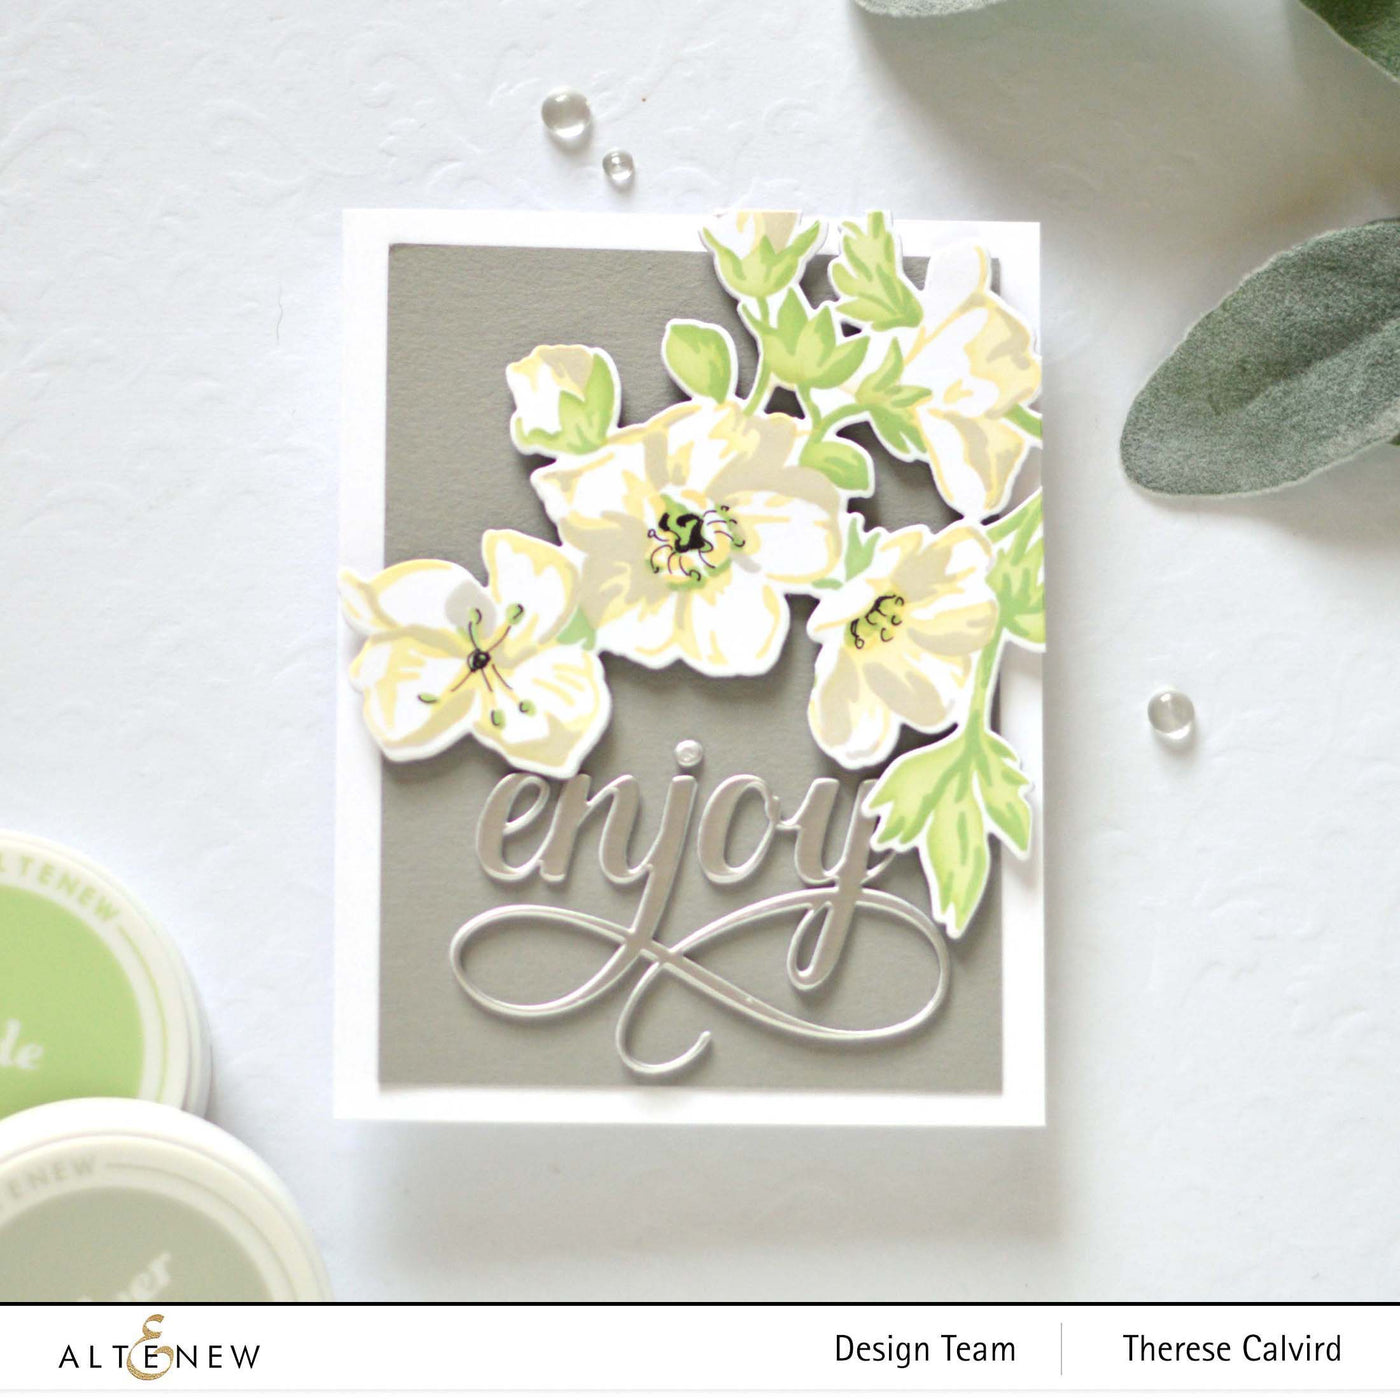 Swamp Buttercup Layering Stencil Set (5 in 1)